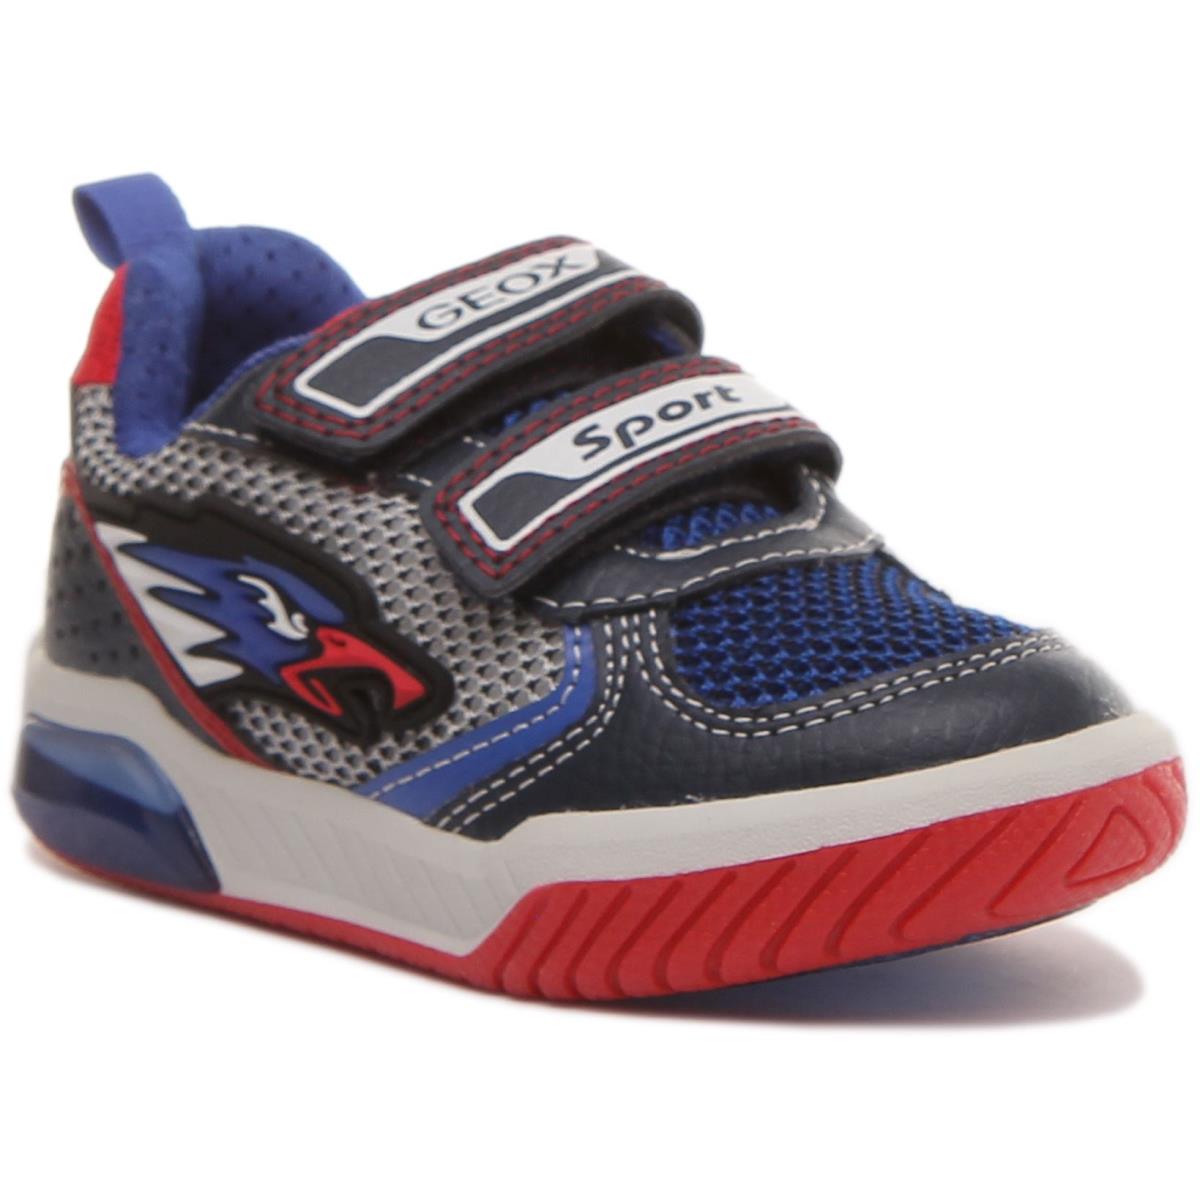 Geox Inek B. B Kids Two Straps Led Light Sneakers In Navy Red Size US 8 - 13 NAVY RED